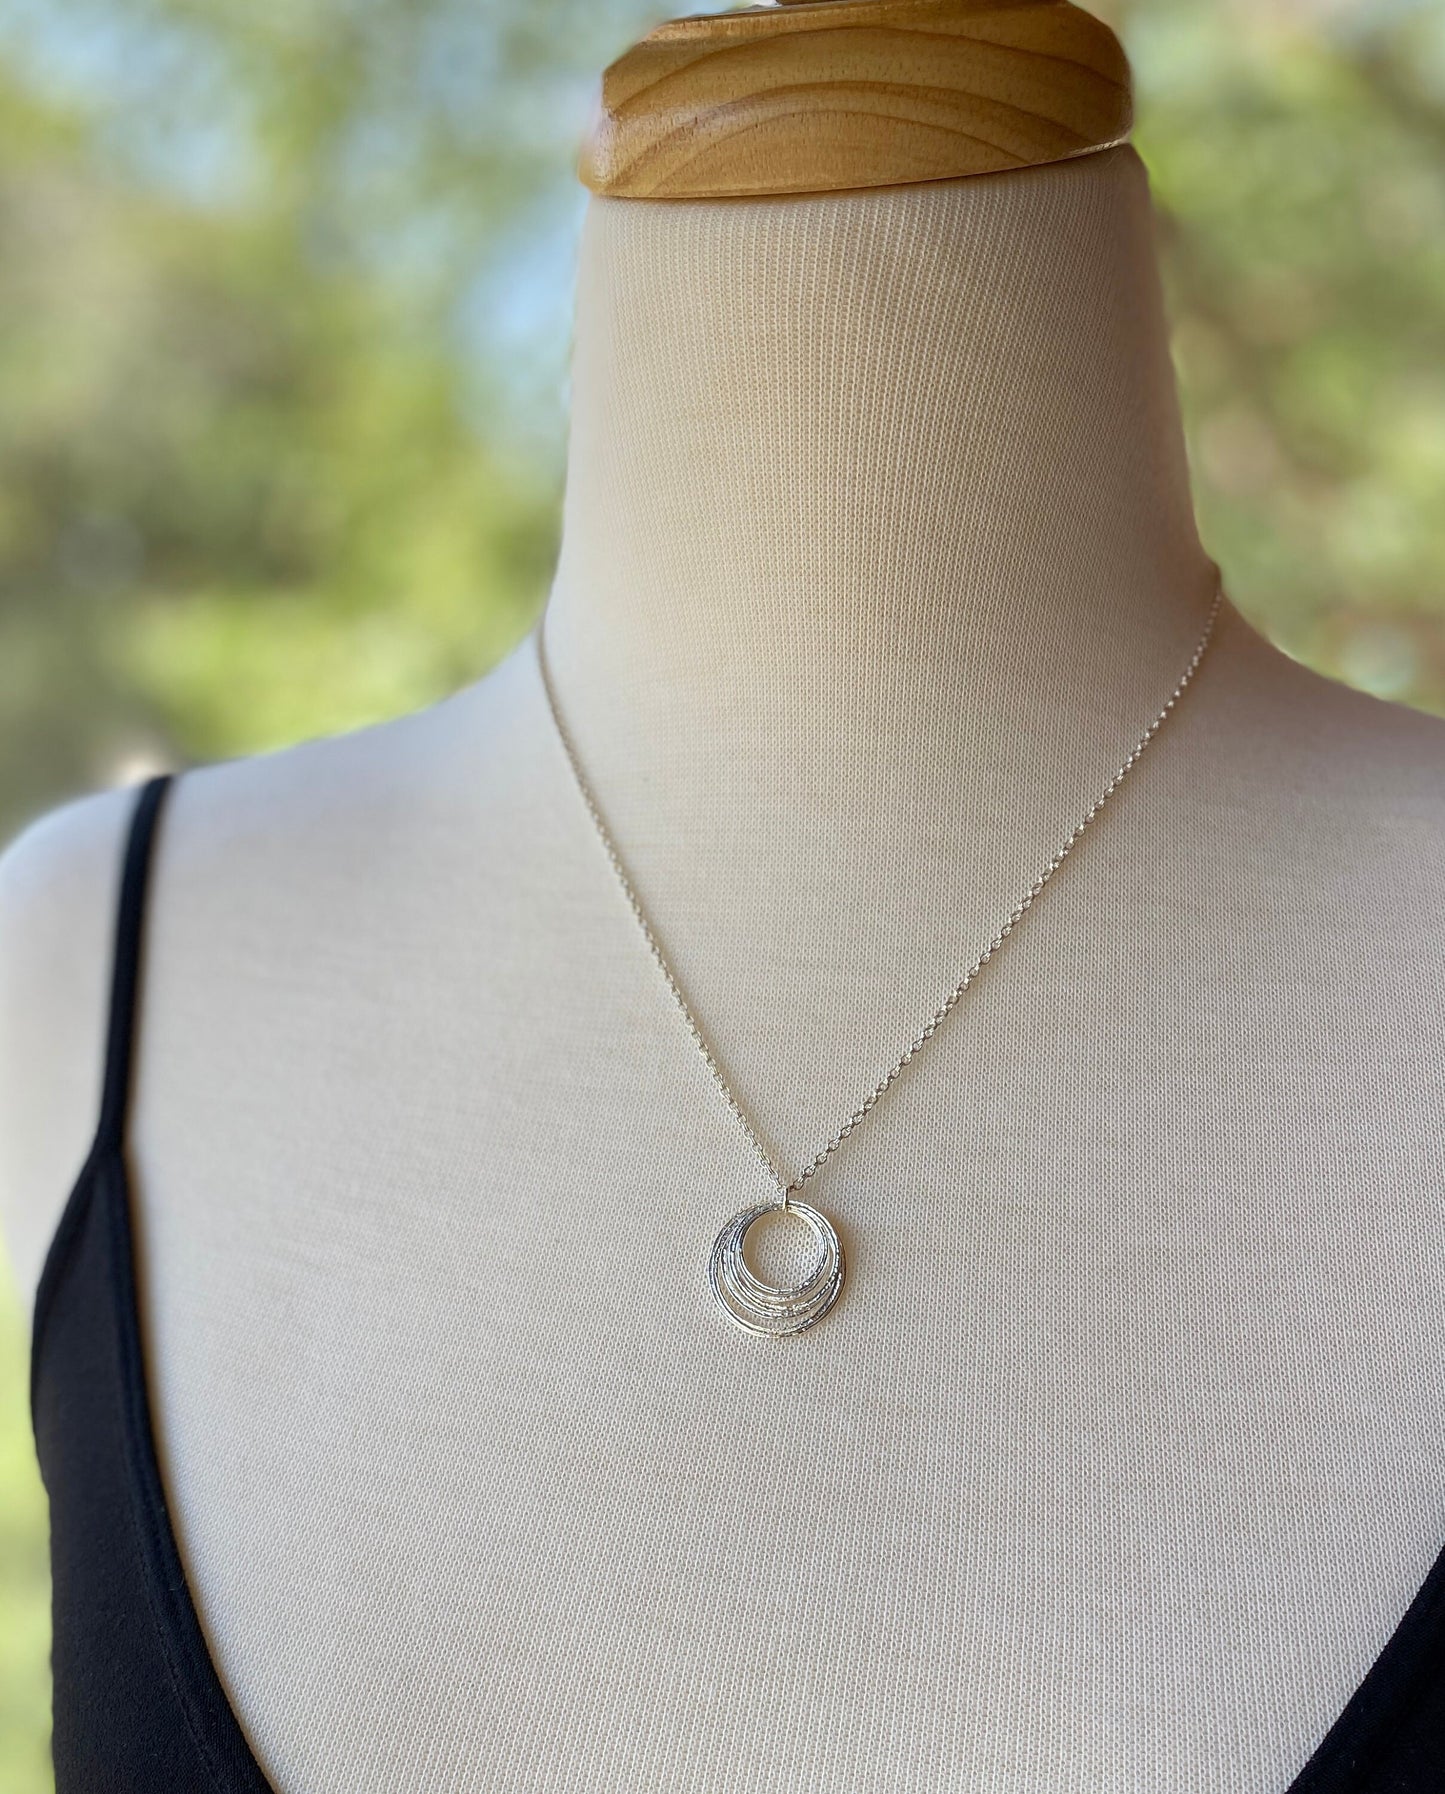 7 Circle 70th Minimalist Milestone Birthday Necklace, Sterling Silver 7 Rings Seven Decades Handcrafted Perfectly Imperfect Circle Pendant